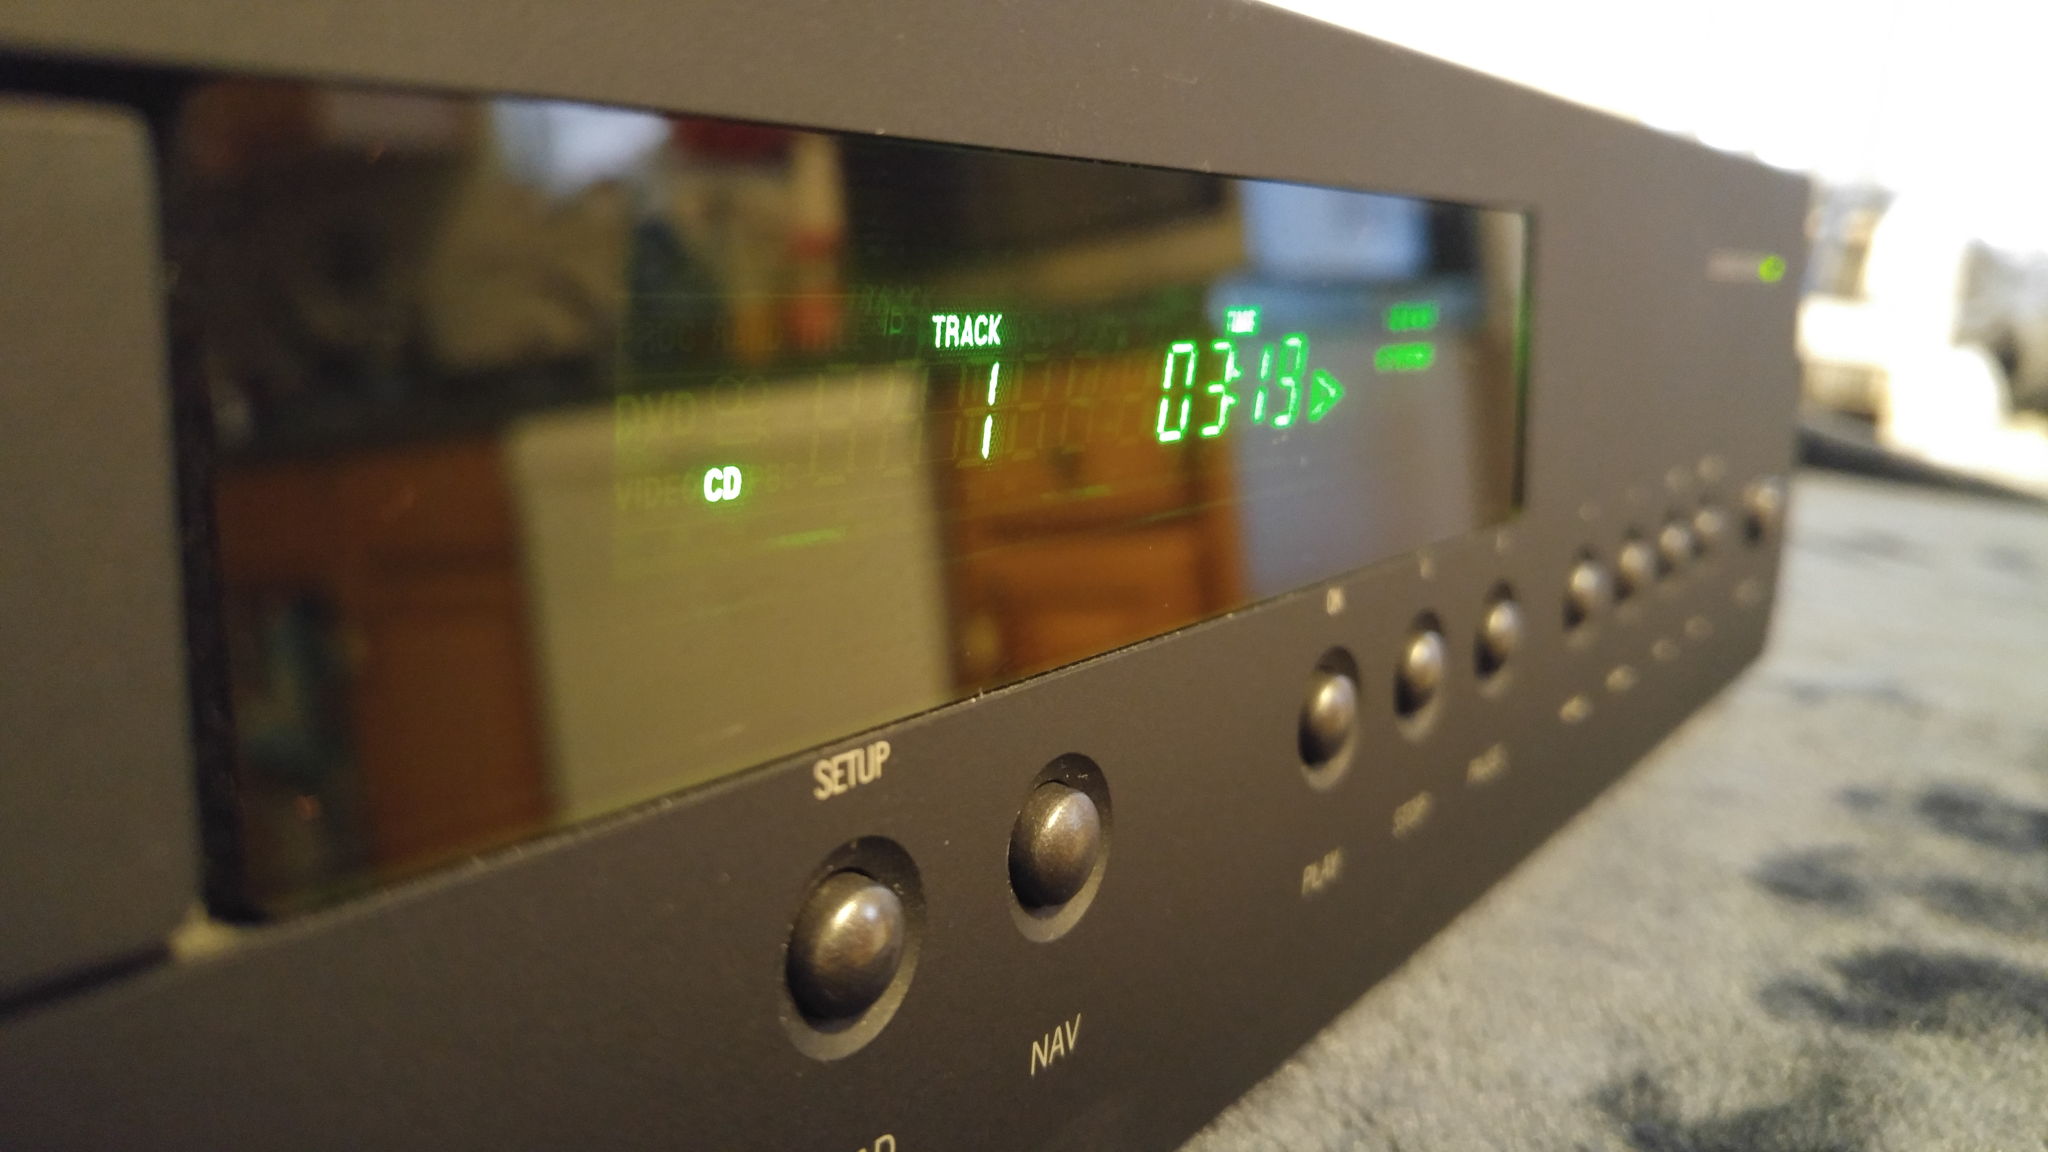 Arcam DV29 ($3250) REFERENCE CLASS disc player 2